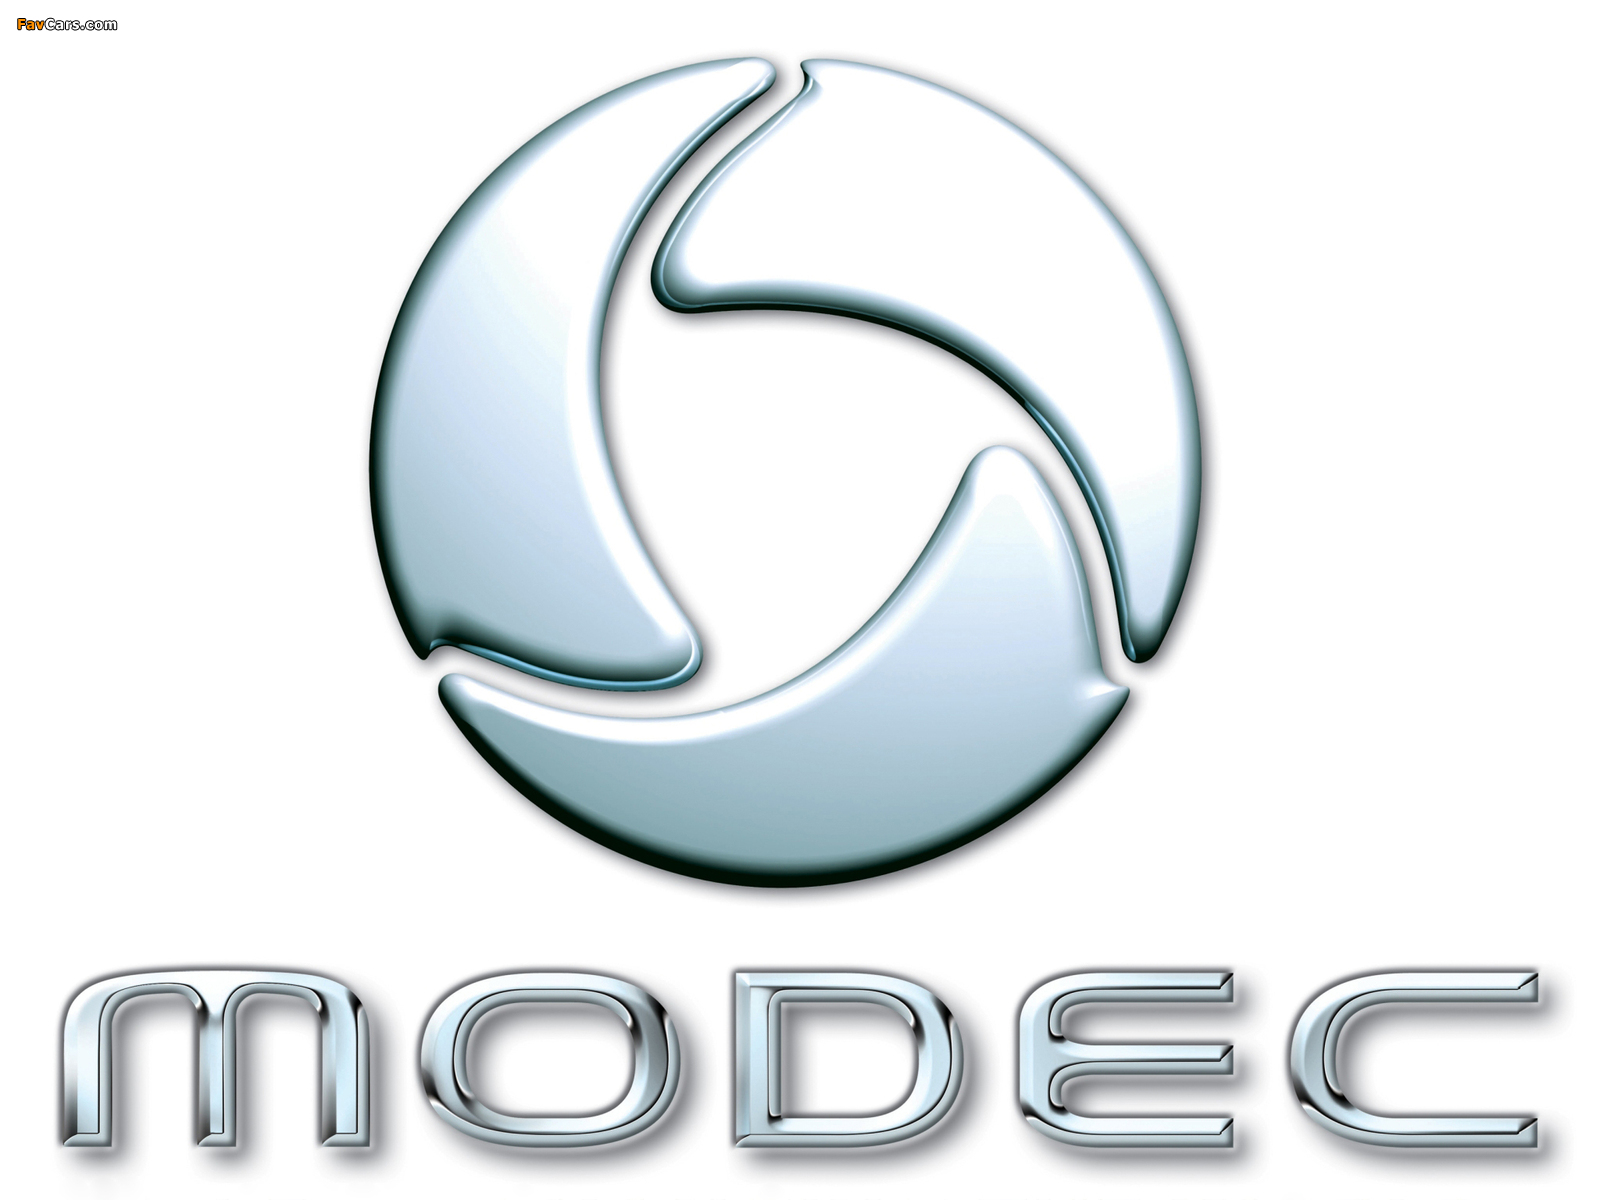 Modec wallpapers (1600 x 1200)